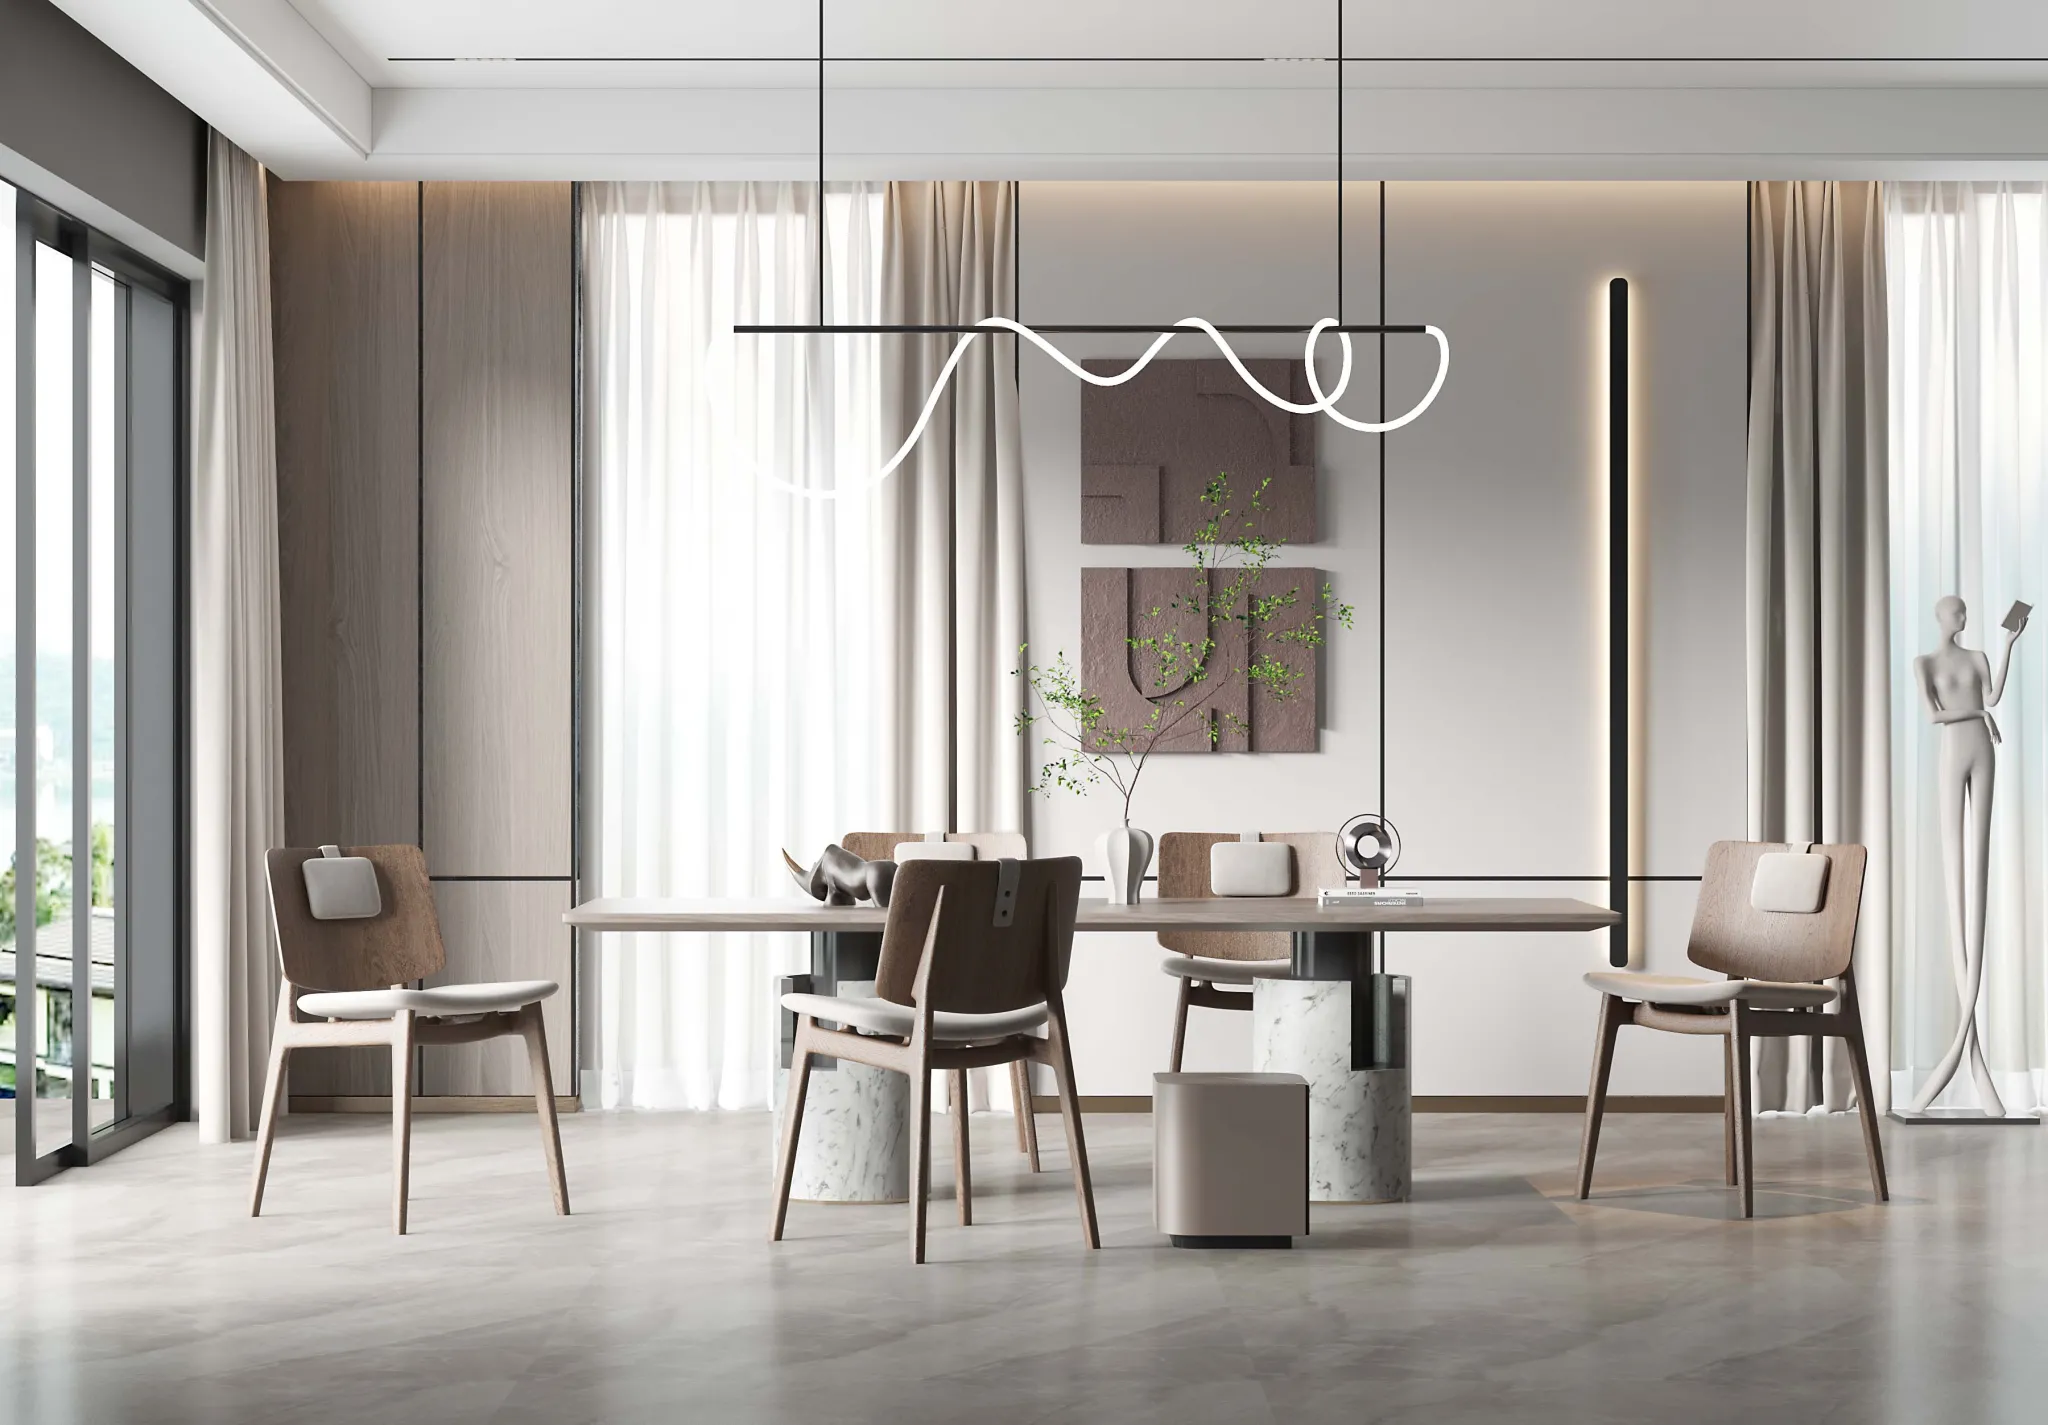 HOUSE SPACE 3D SCENES – DINING ROOM – 0041